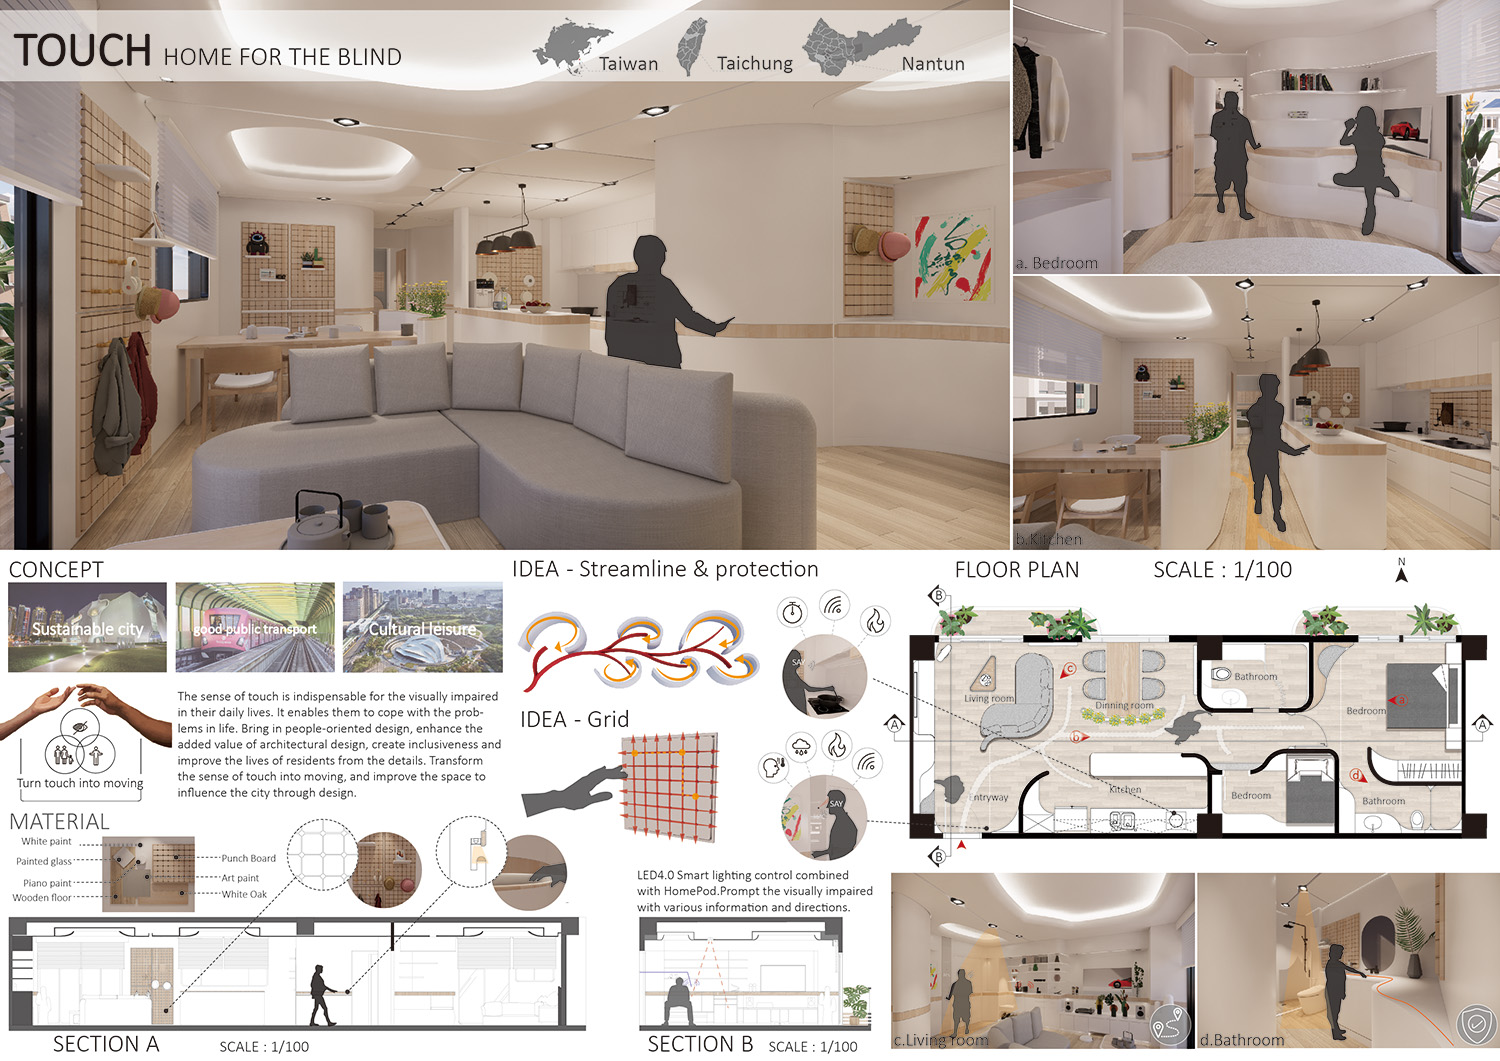 Shao- Xuan Qiu and Wei-Yun Xu won two prizes in "Interior Design of Apartment" and "Interior House Interior Design" at the same time